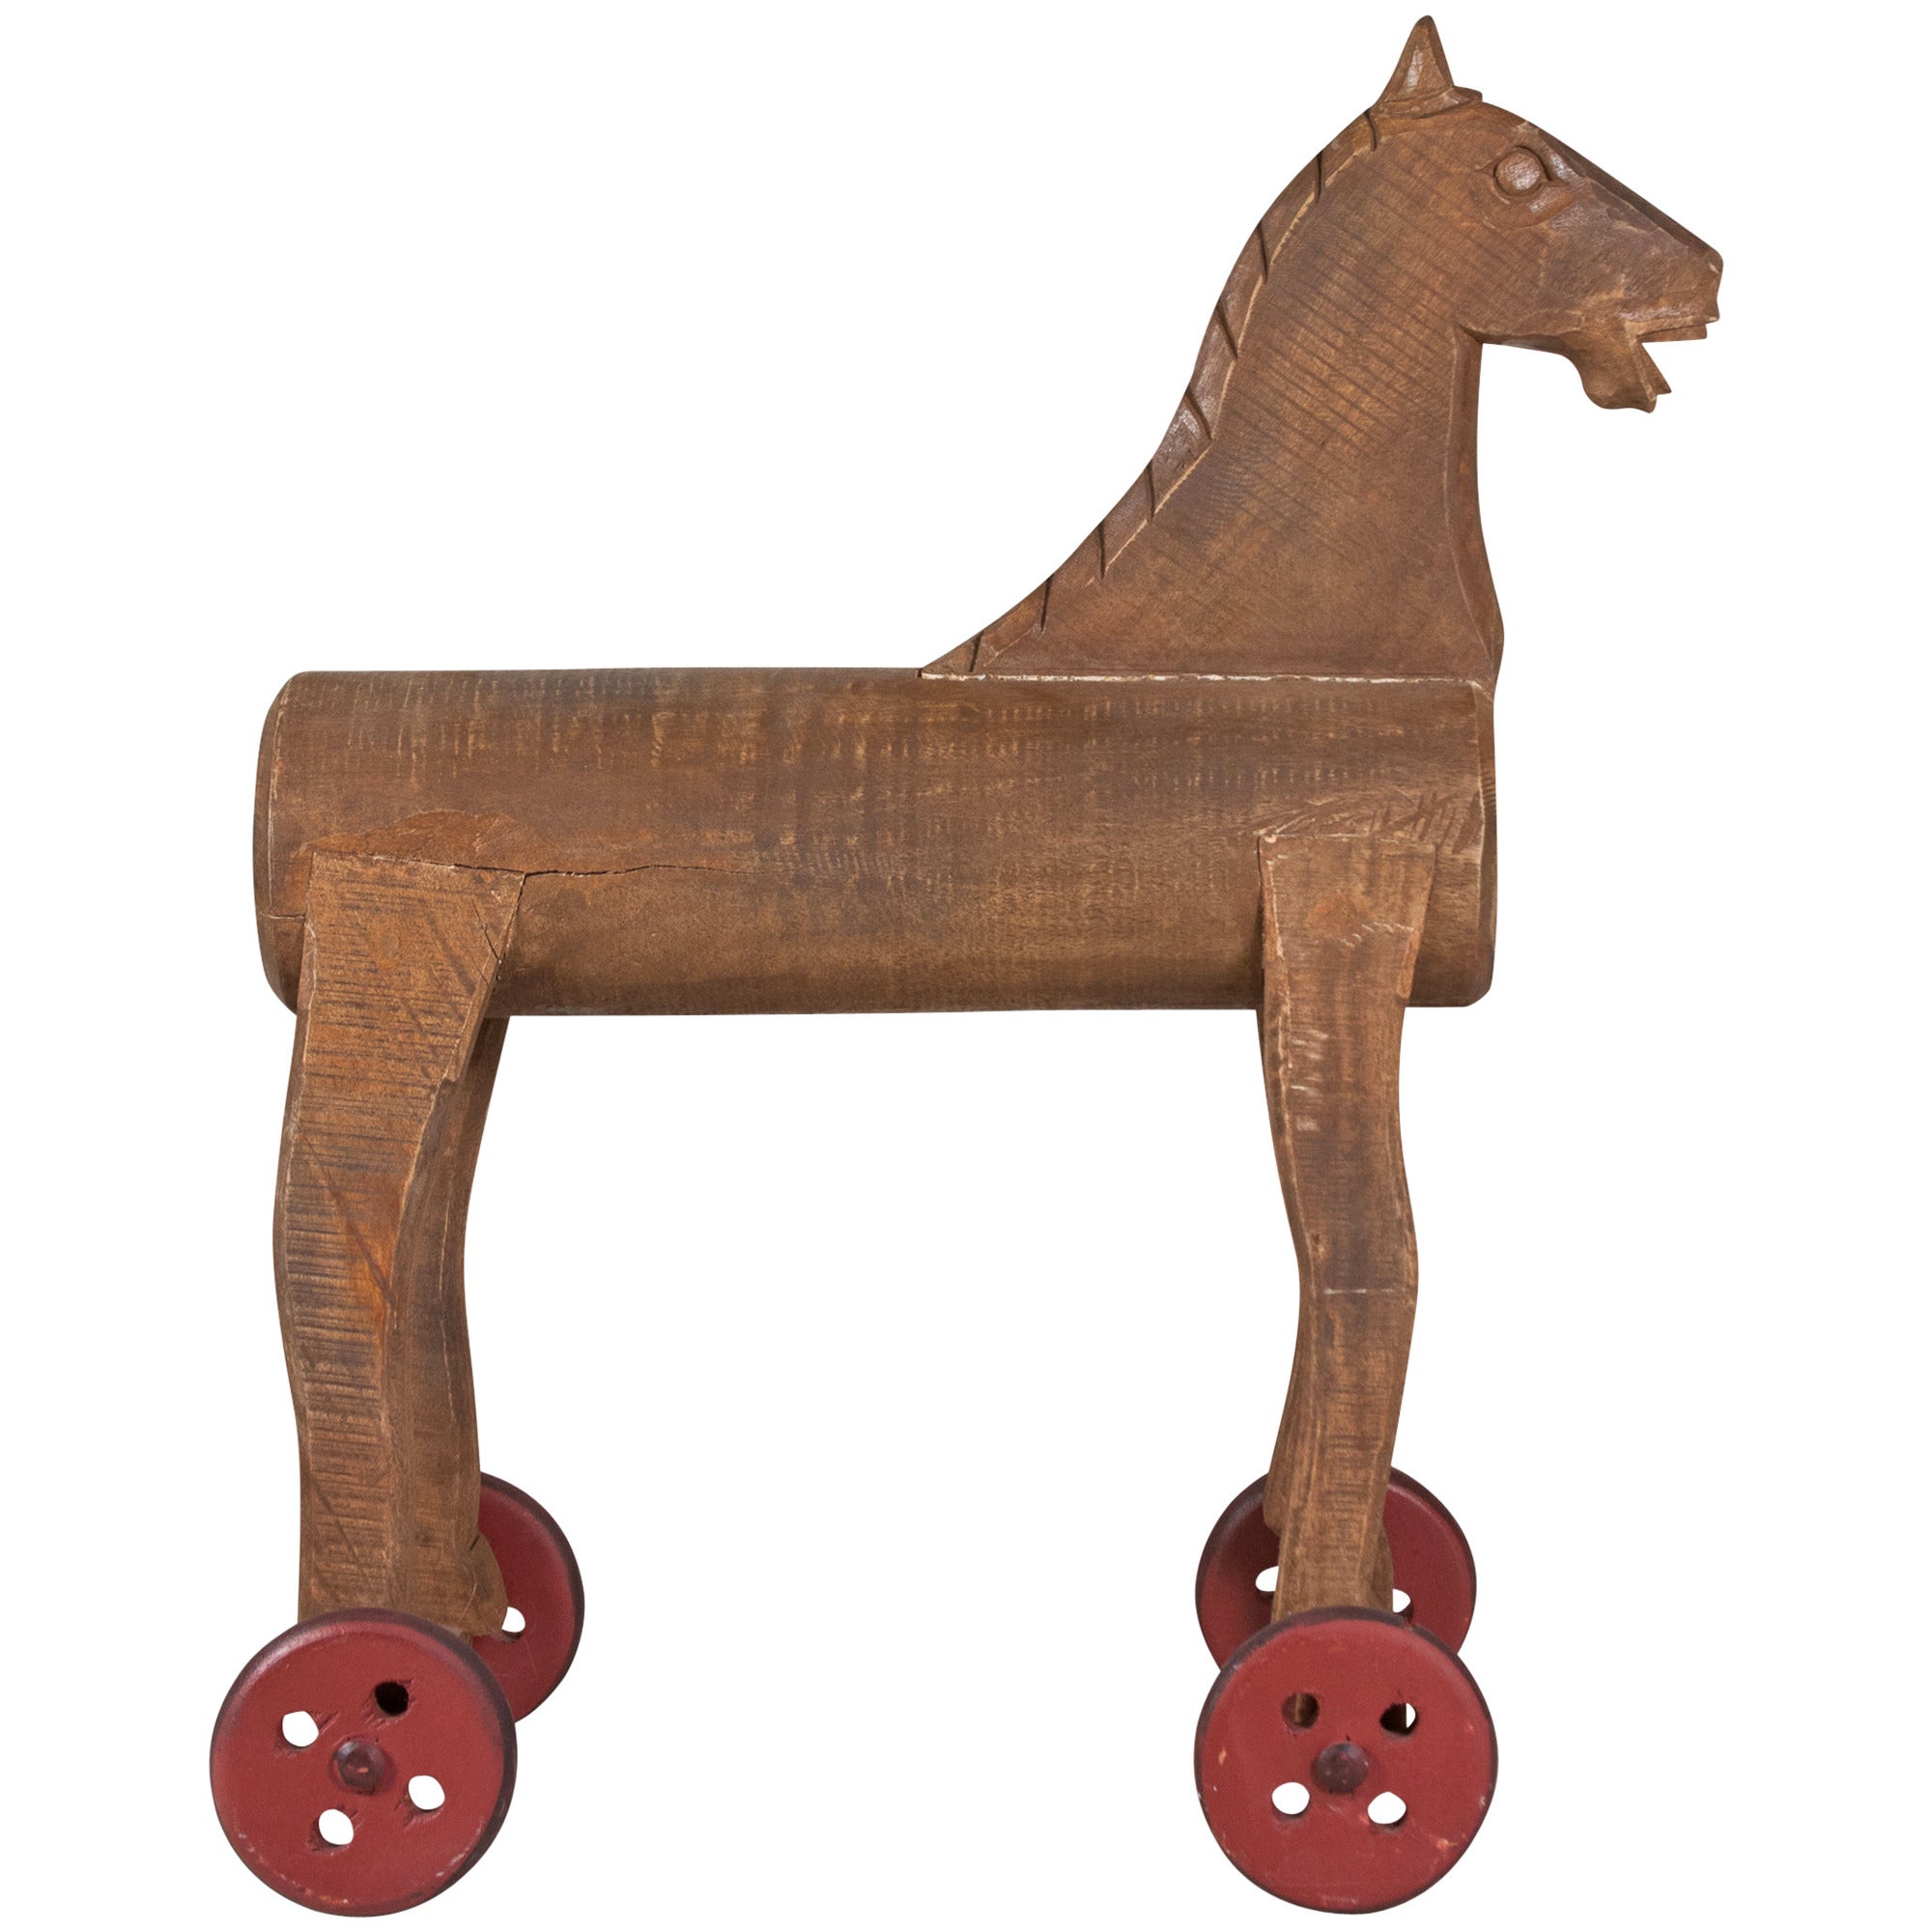 Early American Wooden Horse For Sale